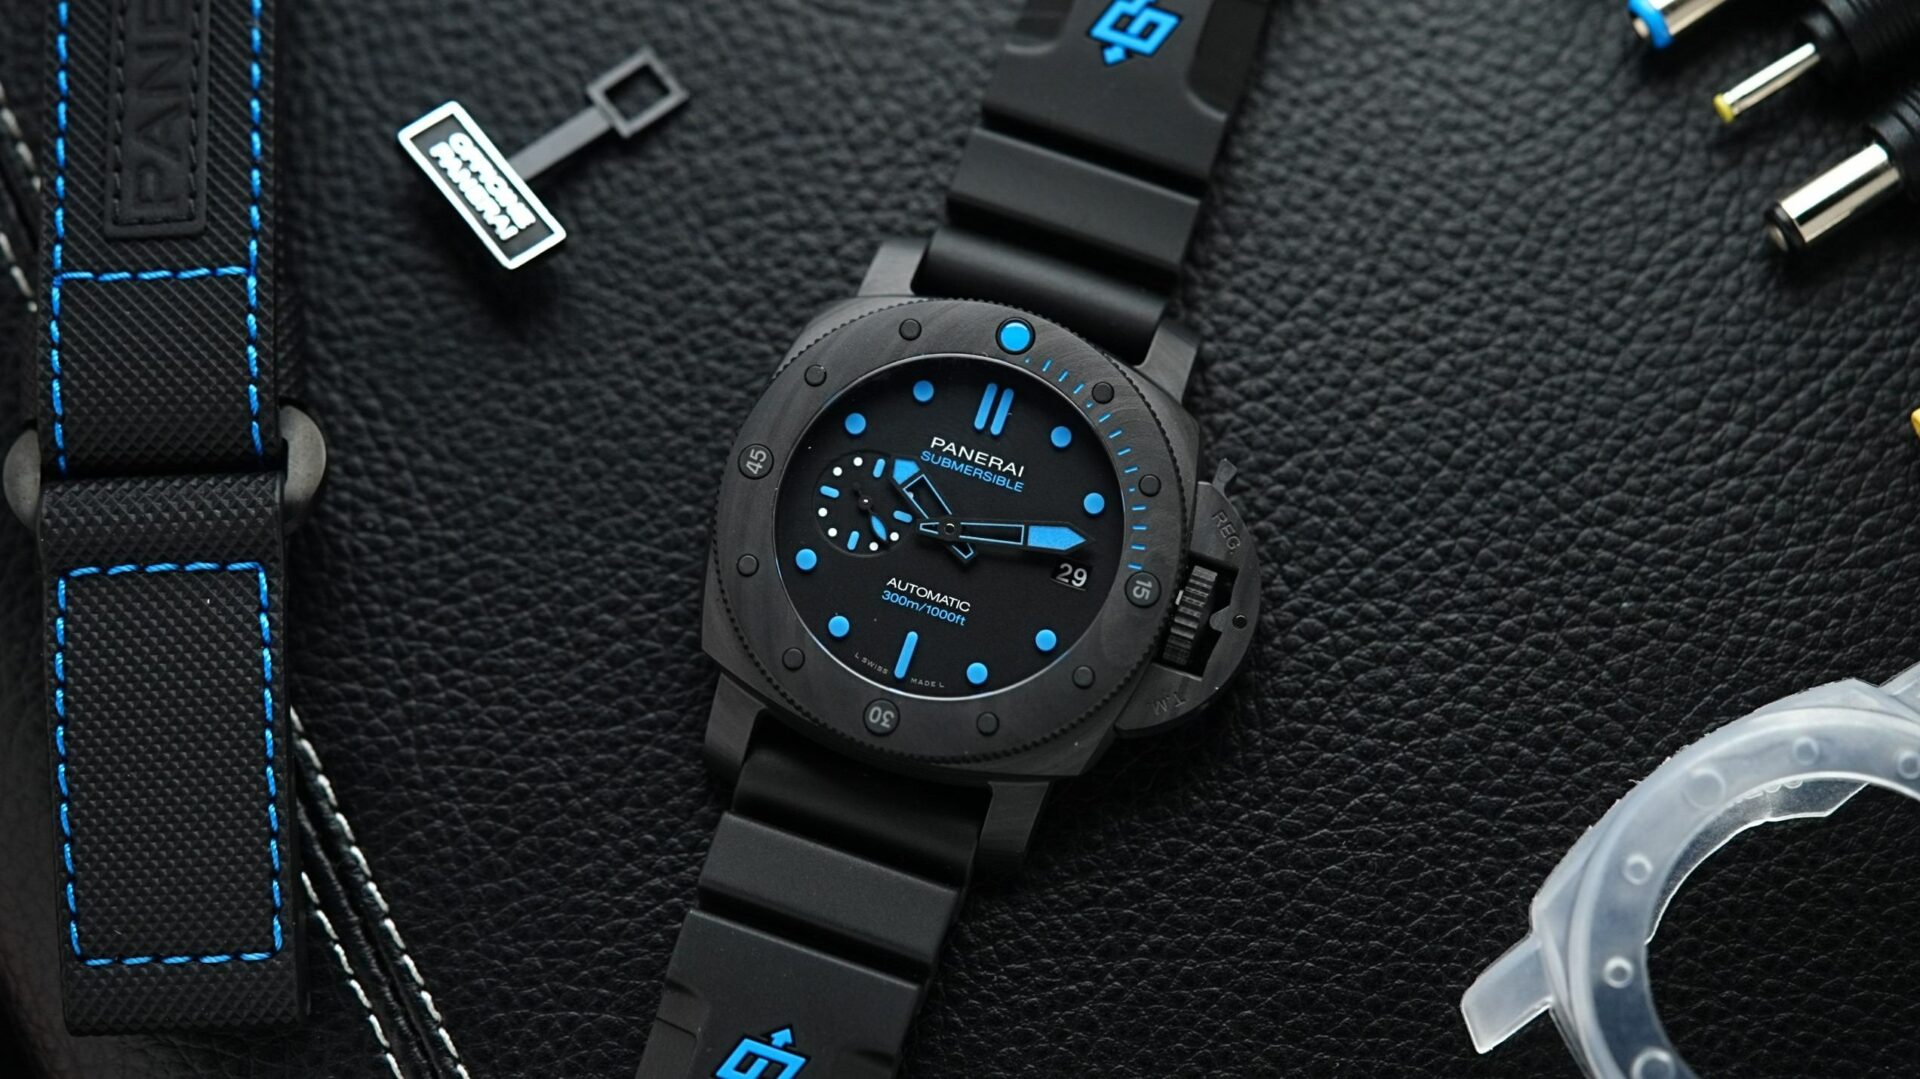 Panerai Submersible Carbotech PAM960 displayed with black background and props.